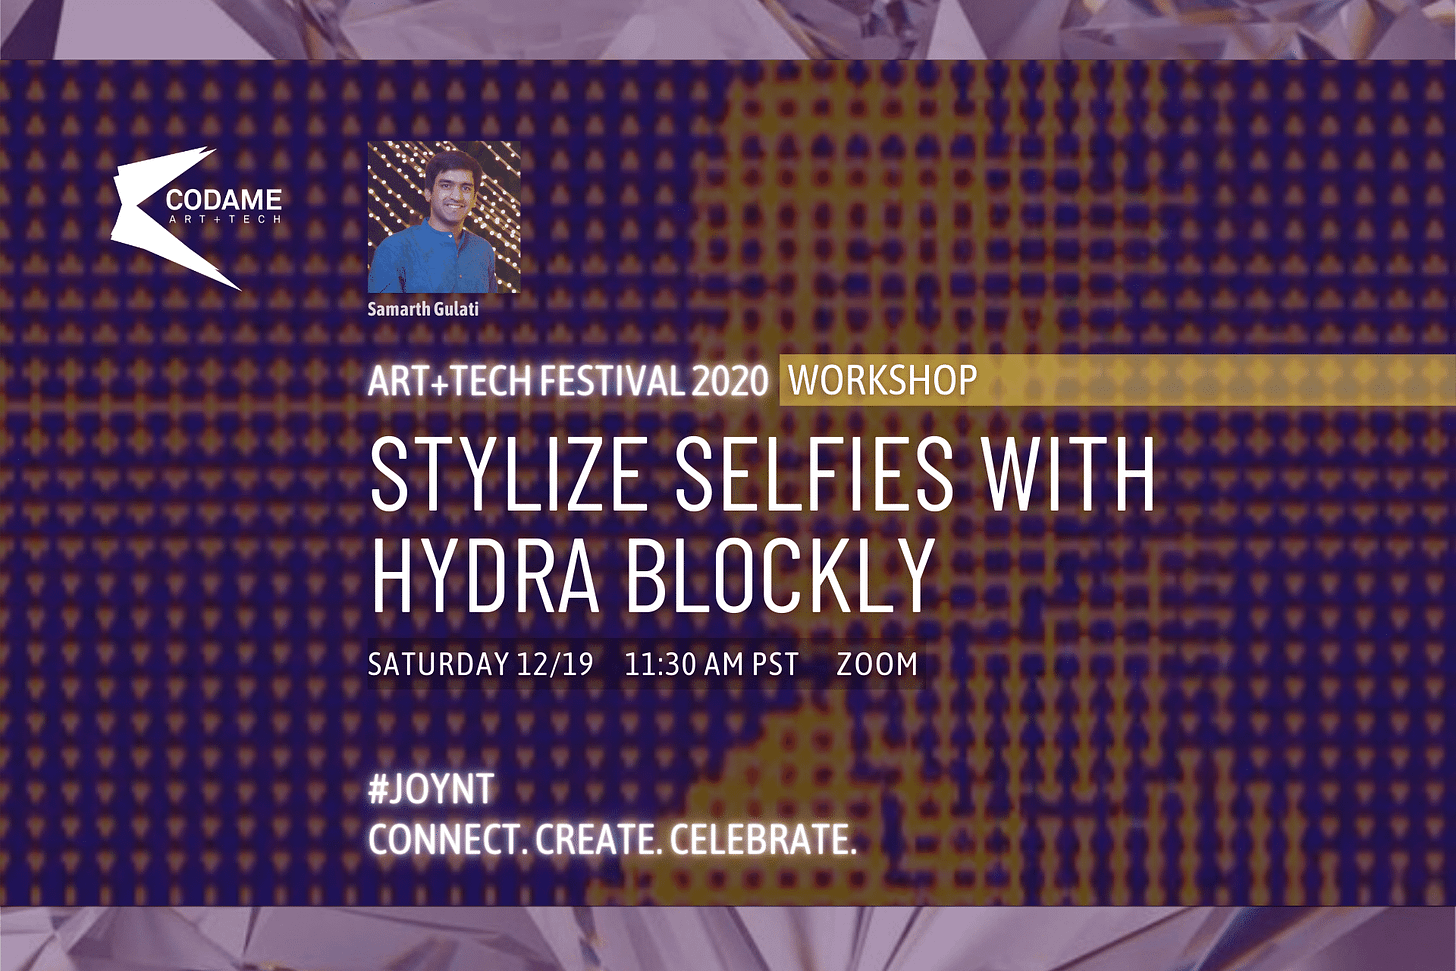 Stylize Selfies With Hydra Blockly